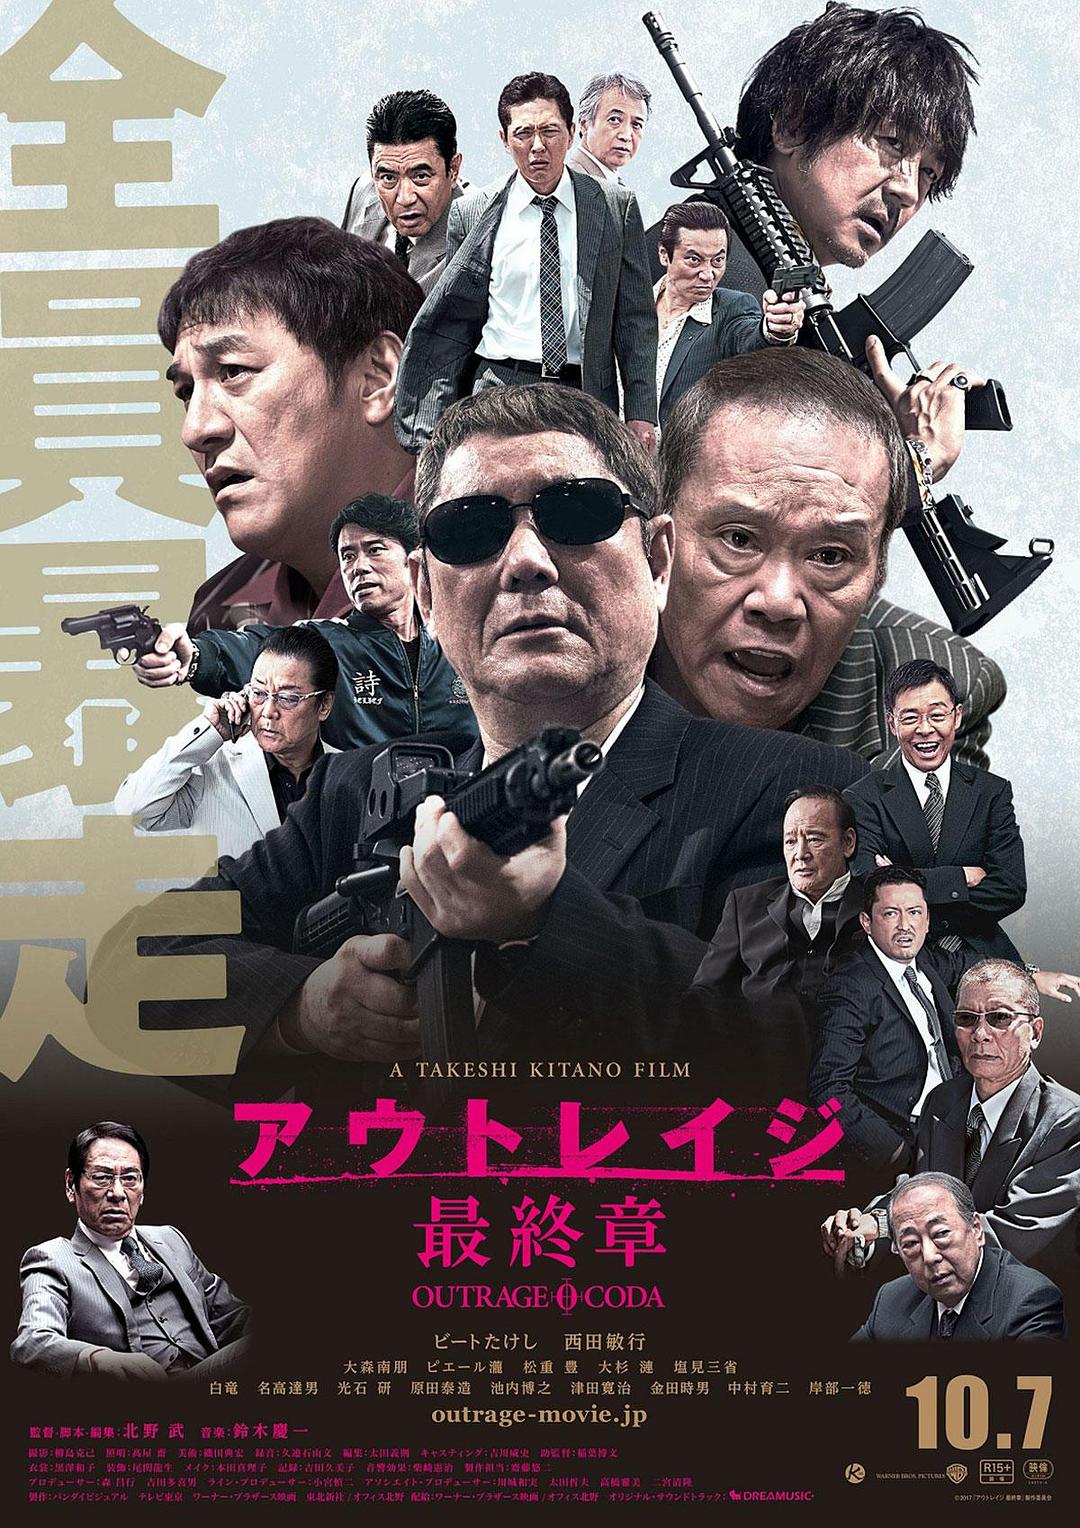 ǵ3 Outrage.Final.Chapter.2017.JAPANESE.1080p.BluRay.x264.DTS-WiKi 8.50GB-1.png